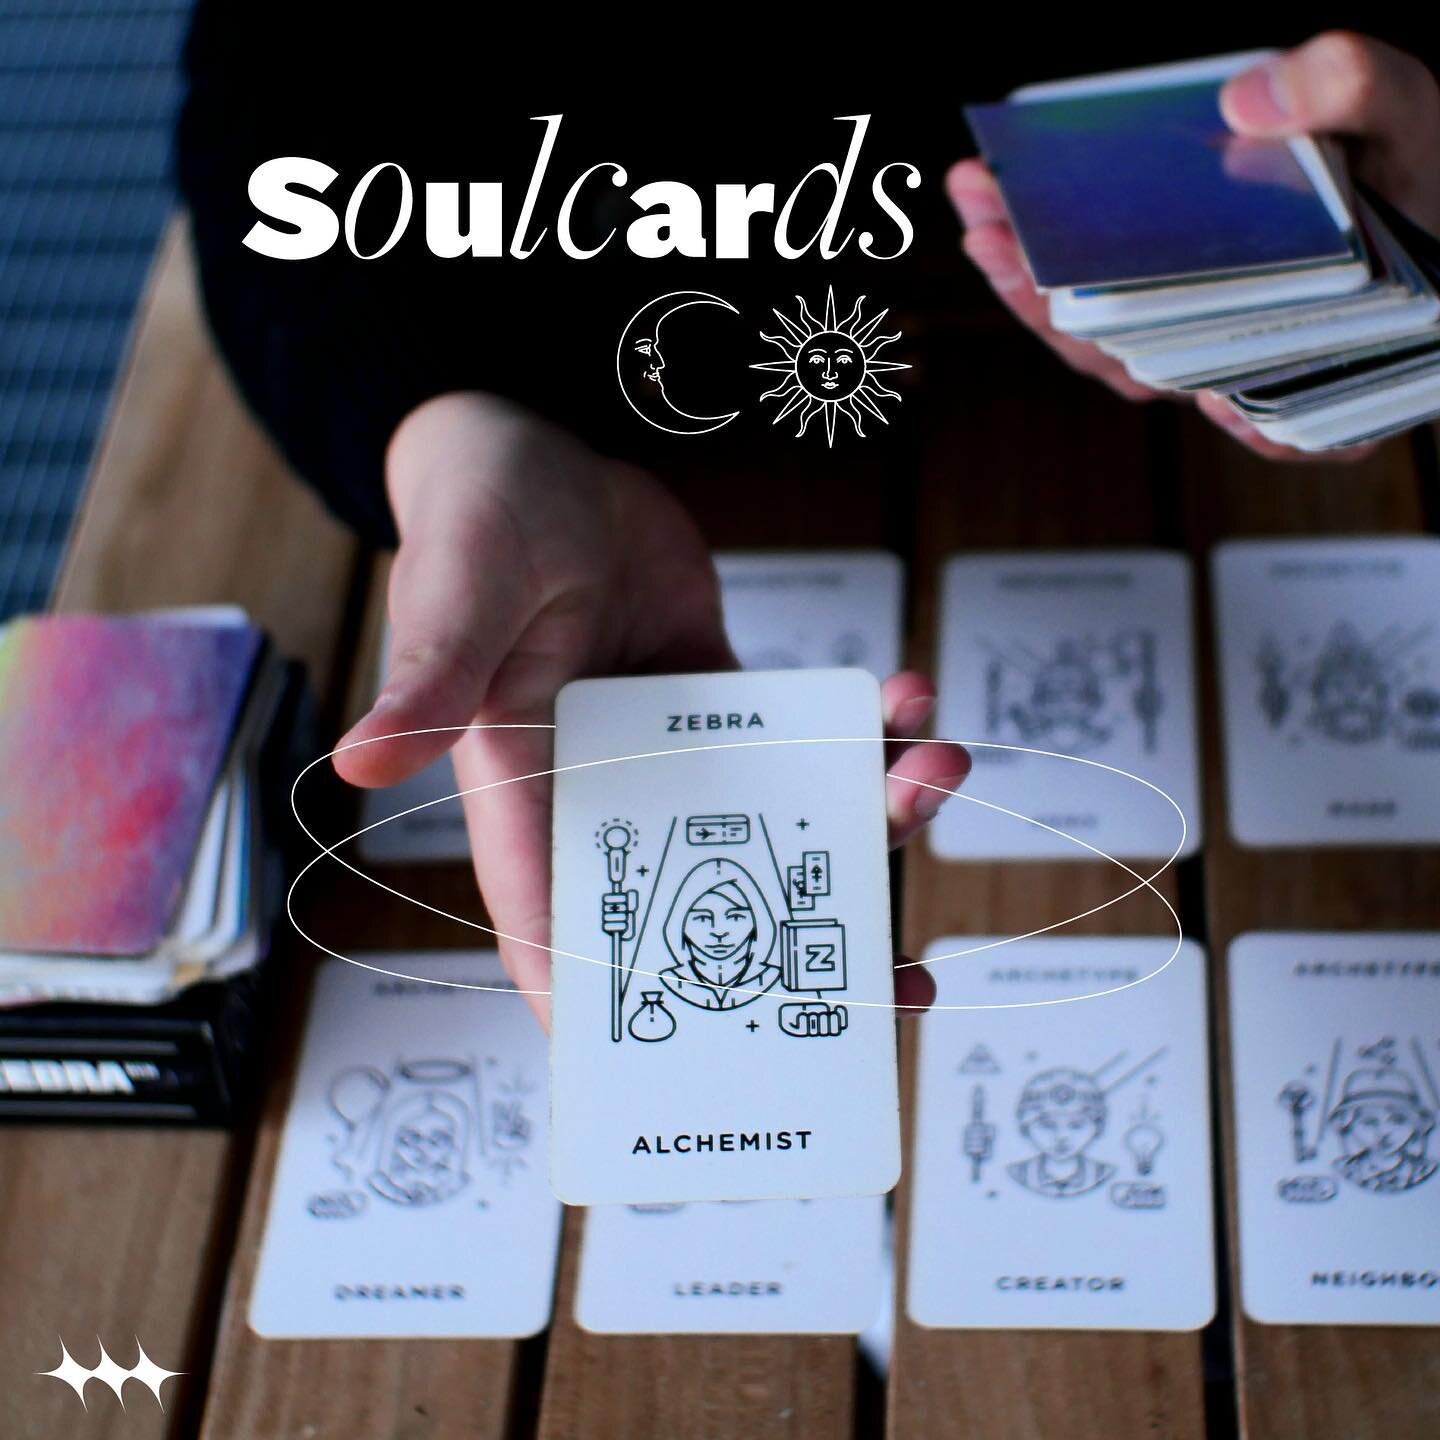 The #soulcards are the first step in the ZEBRA journey ☉ A process to define the soul &amp; purpose that we want to manifest. 
.
.
#design #business #strategy #research
#identity #socialmedia #audiovisual #web
#zebra #brand #alchemy #studio
#soul &am